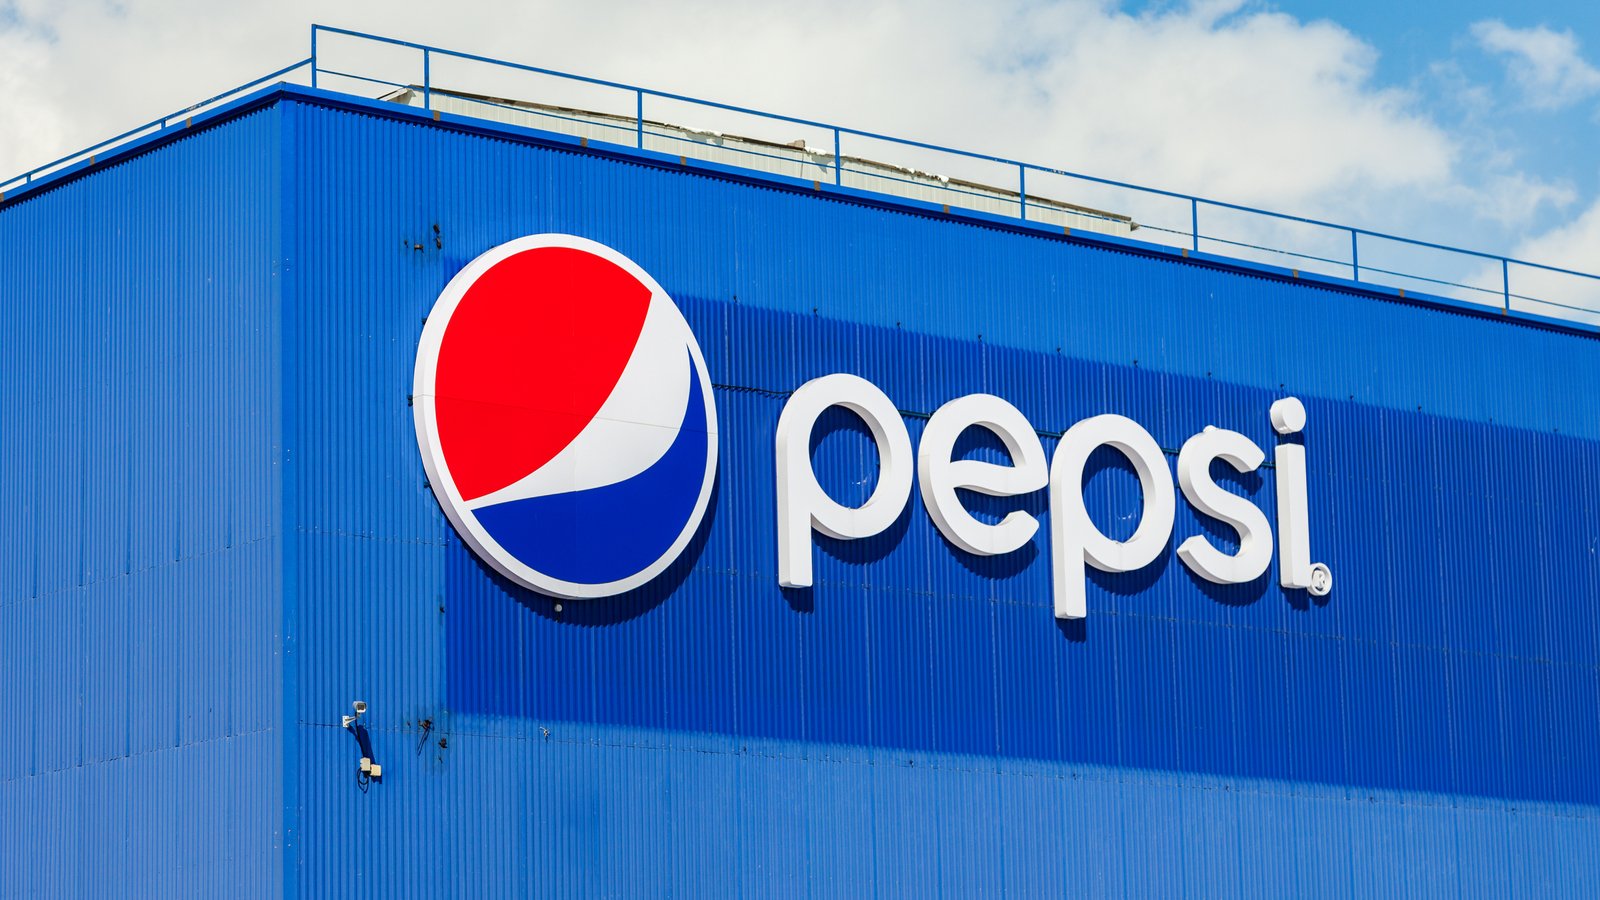 Change Management module was activated in PEPSI